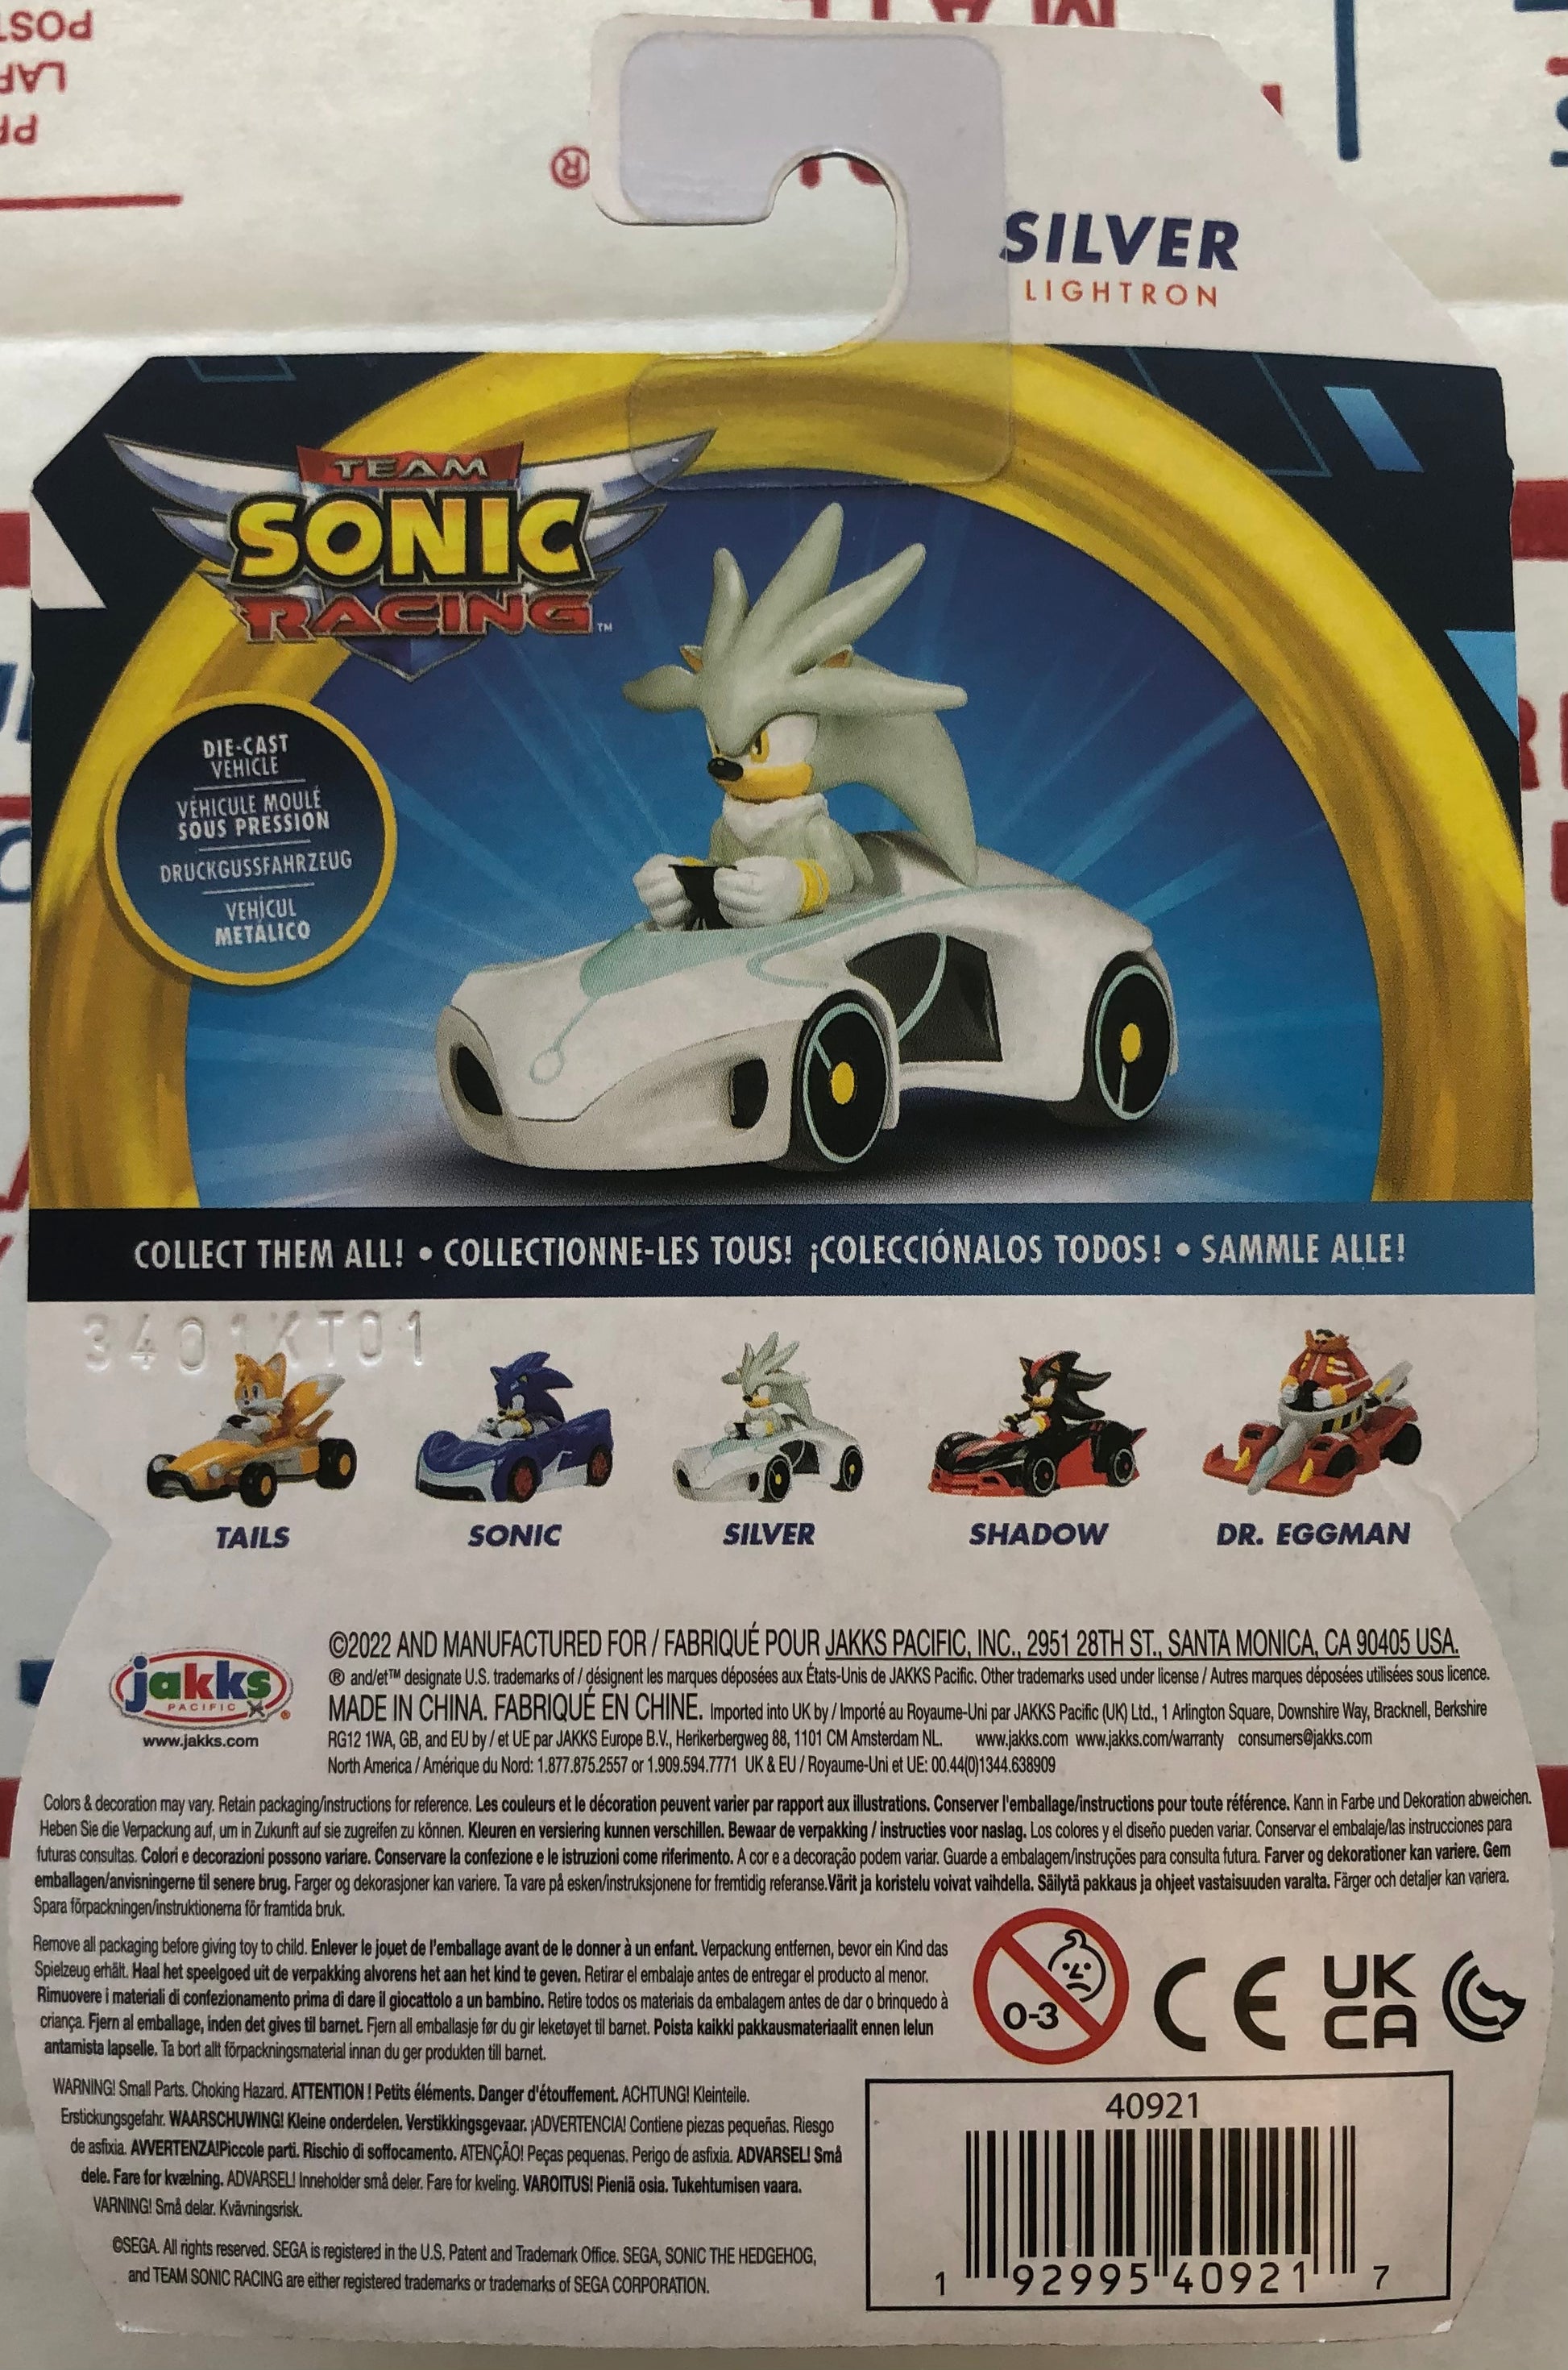 5x SONIC THE HEDGEHOG DIE CAST SONIC / SHADOW / KNUCKLES / TAILS / SILVER  *NEW*